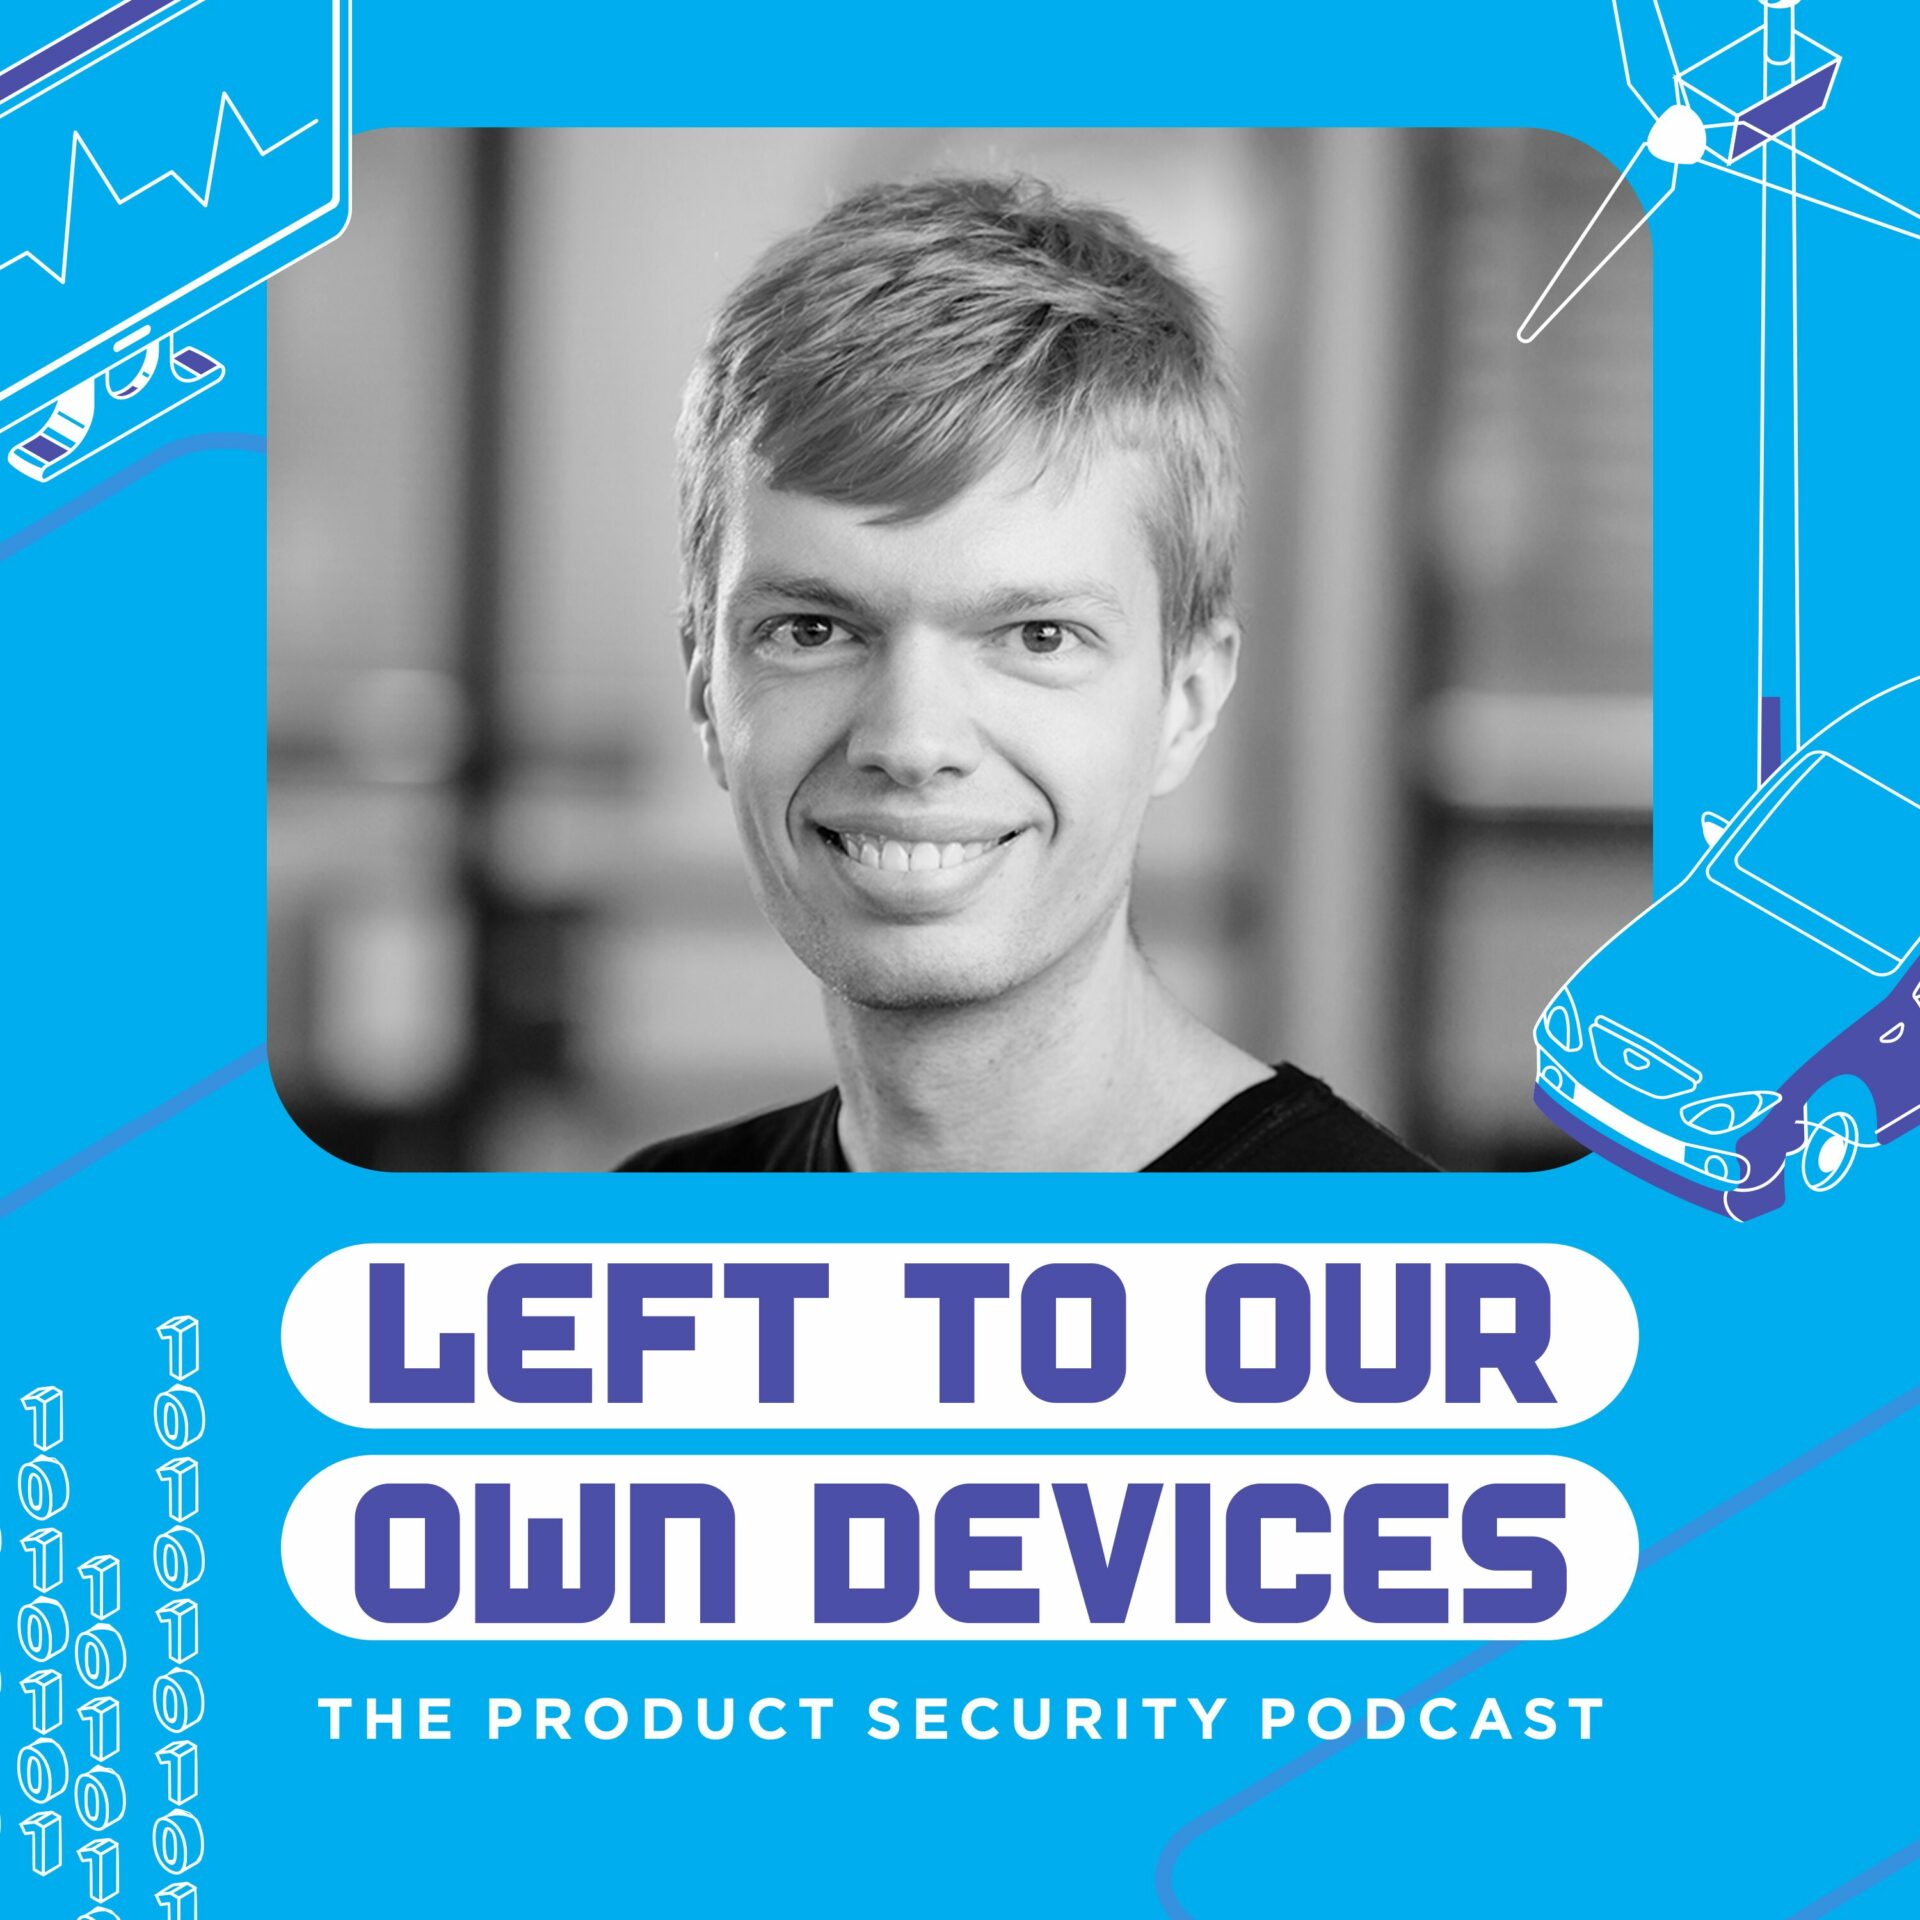 #48: Roman Kelser: From Security Research to AI